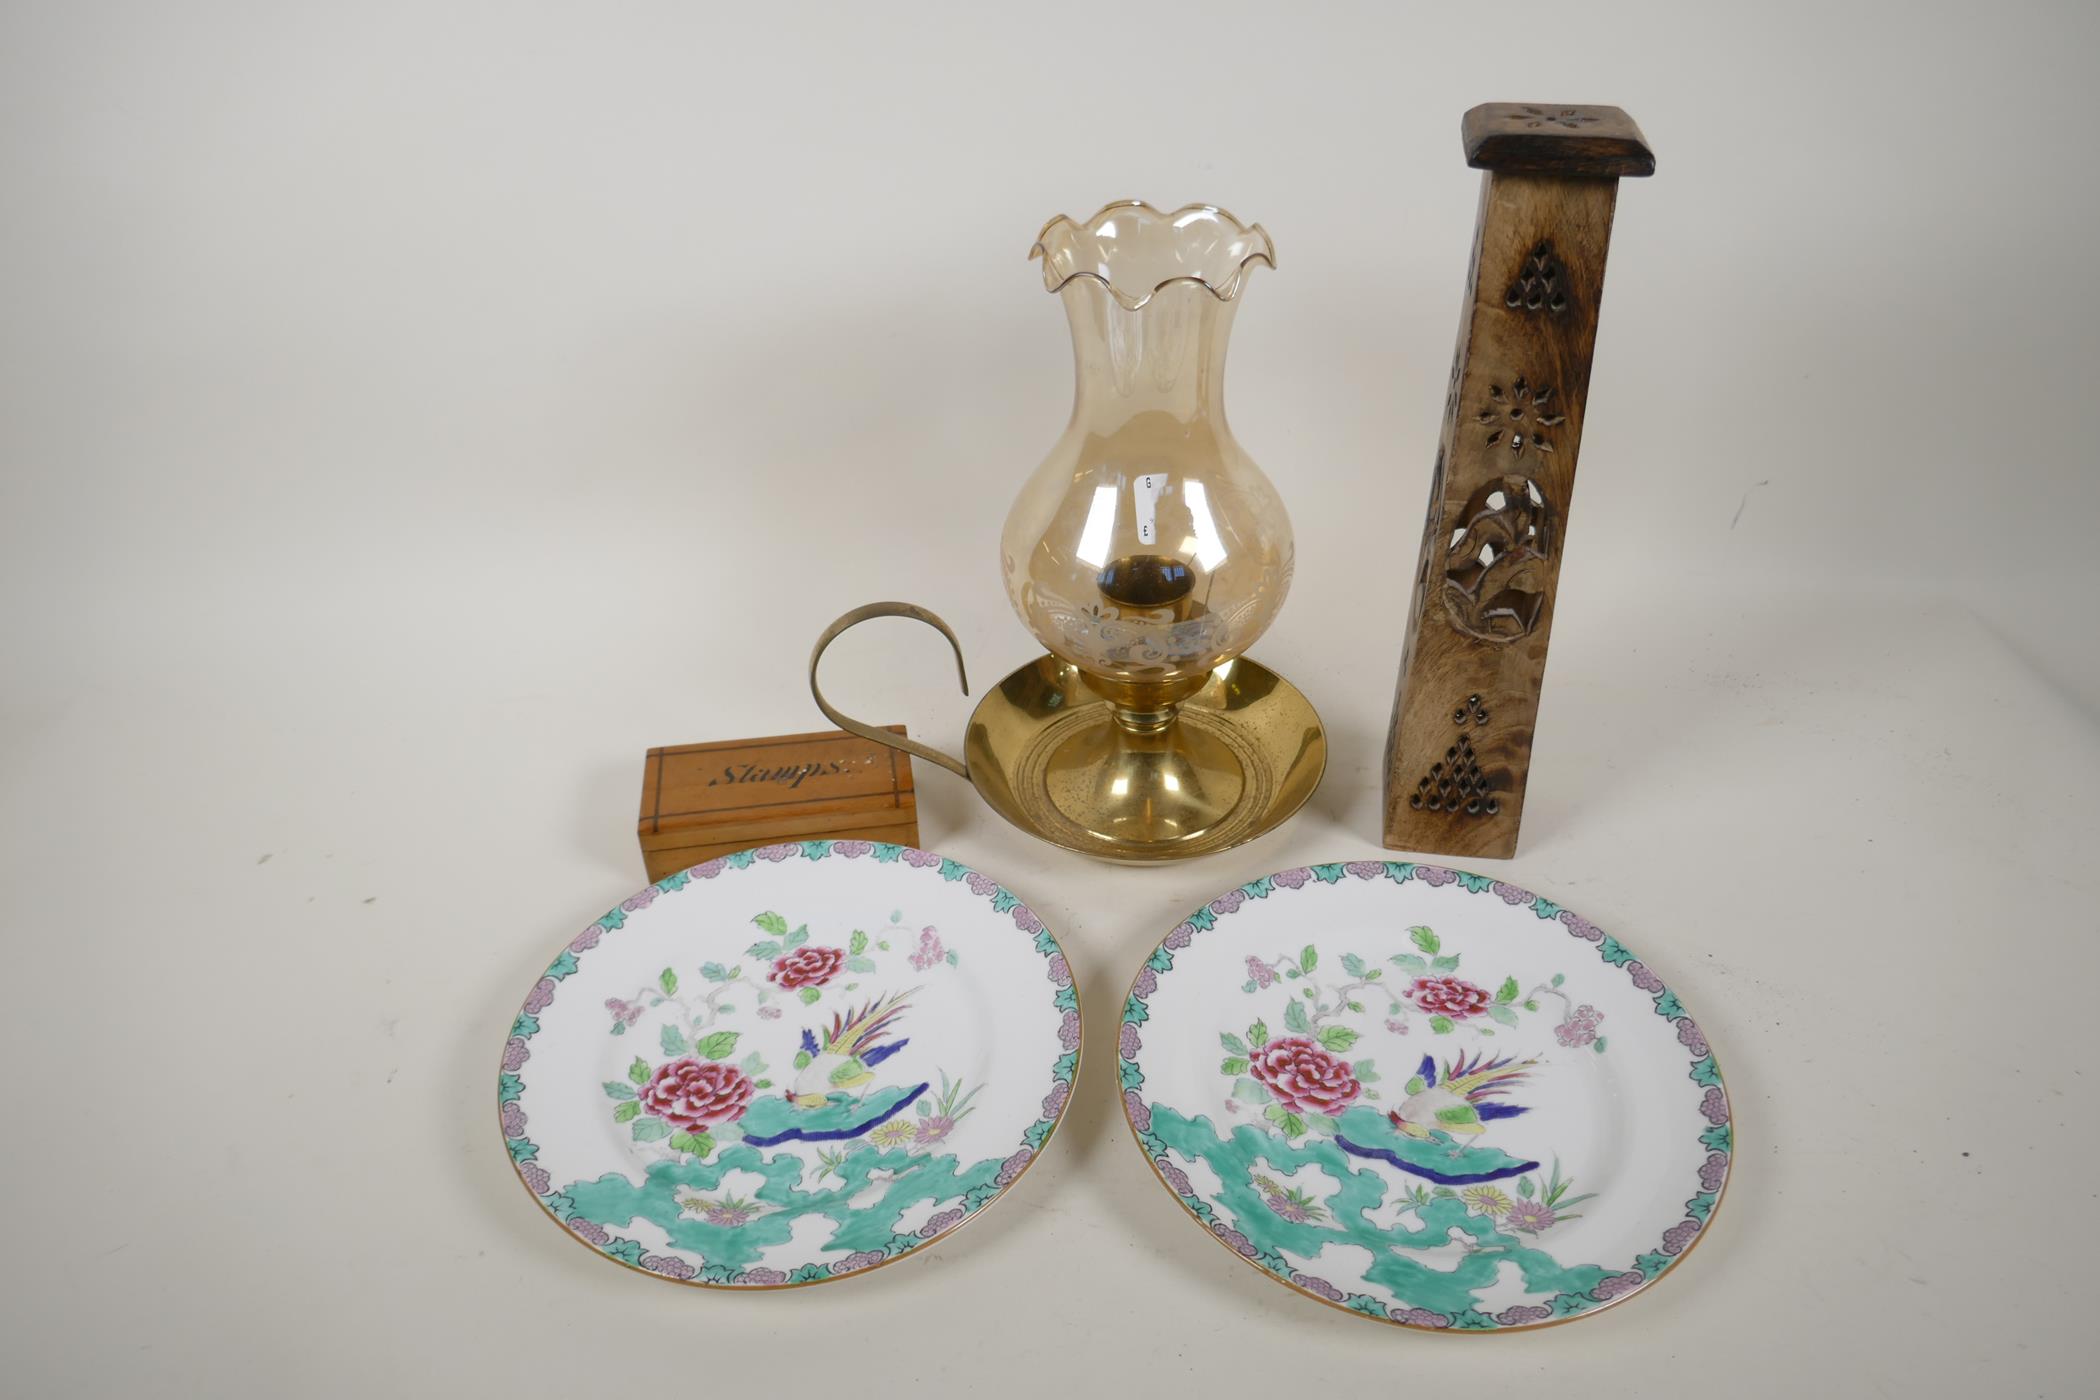 A brass and glass candle night light, 10" high, a C19th stamp box, a pair of Staffordshire plates